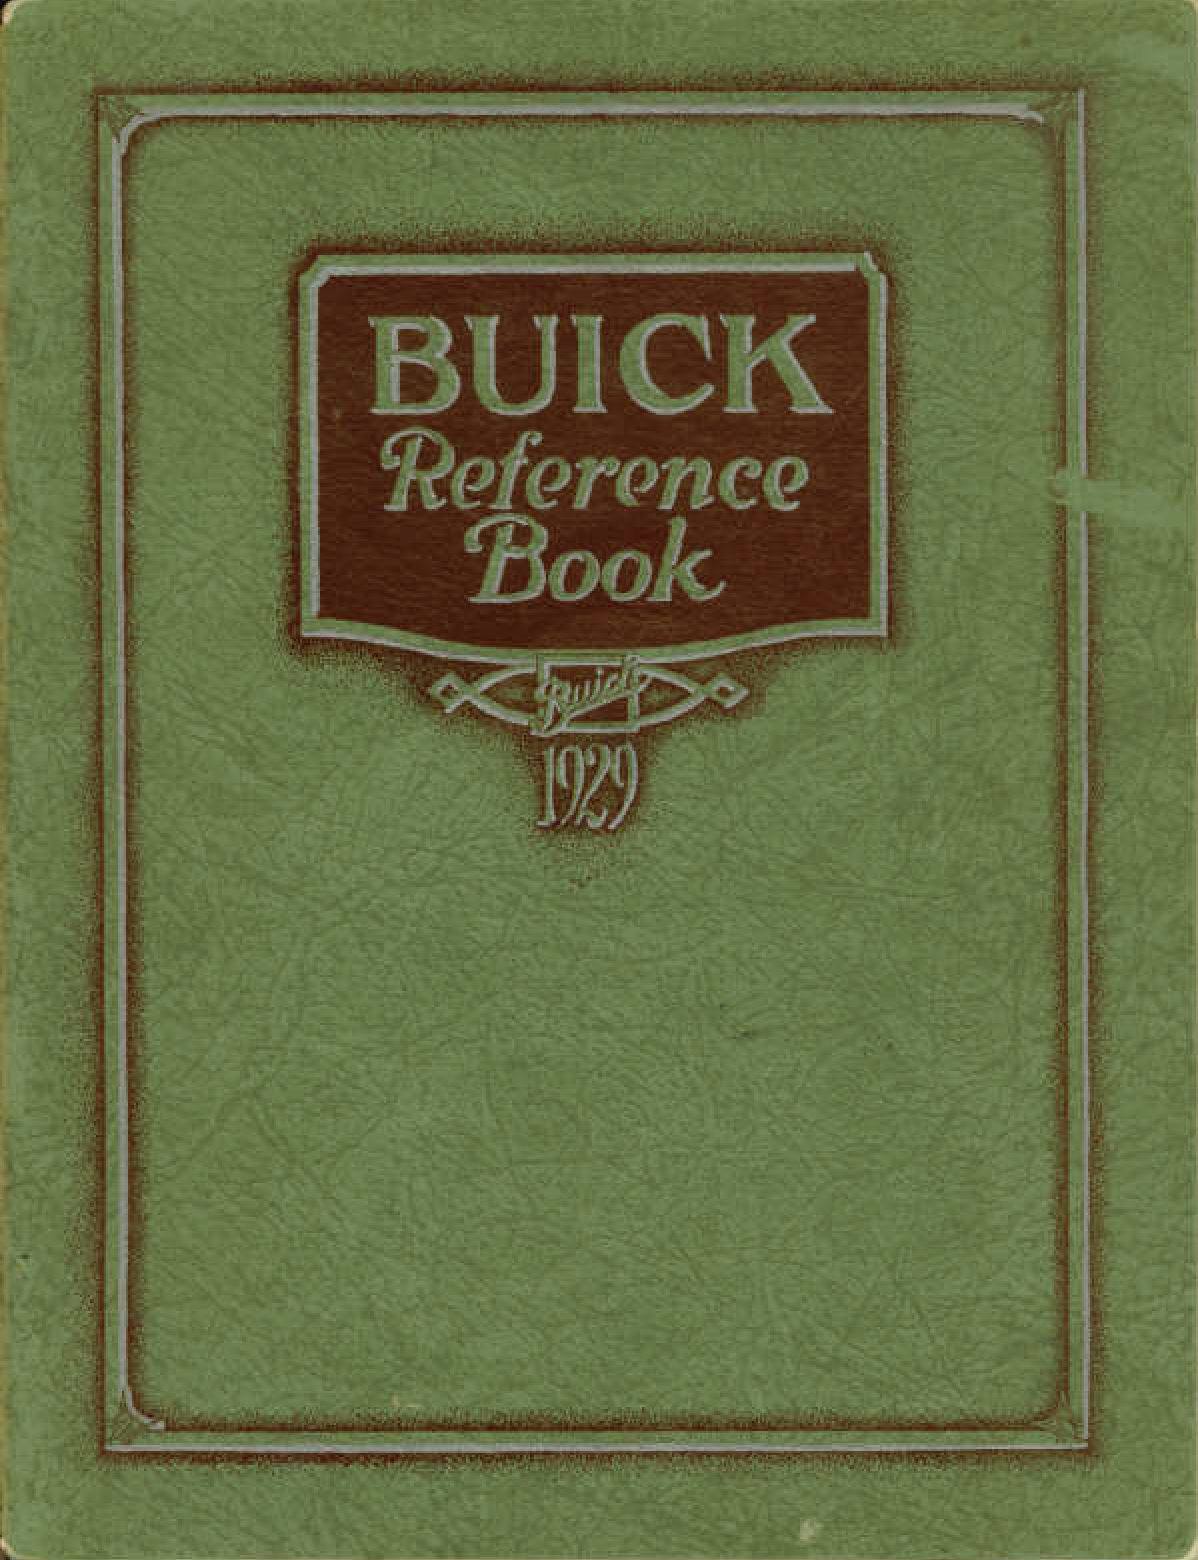 1929 Buick Reference Book-01